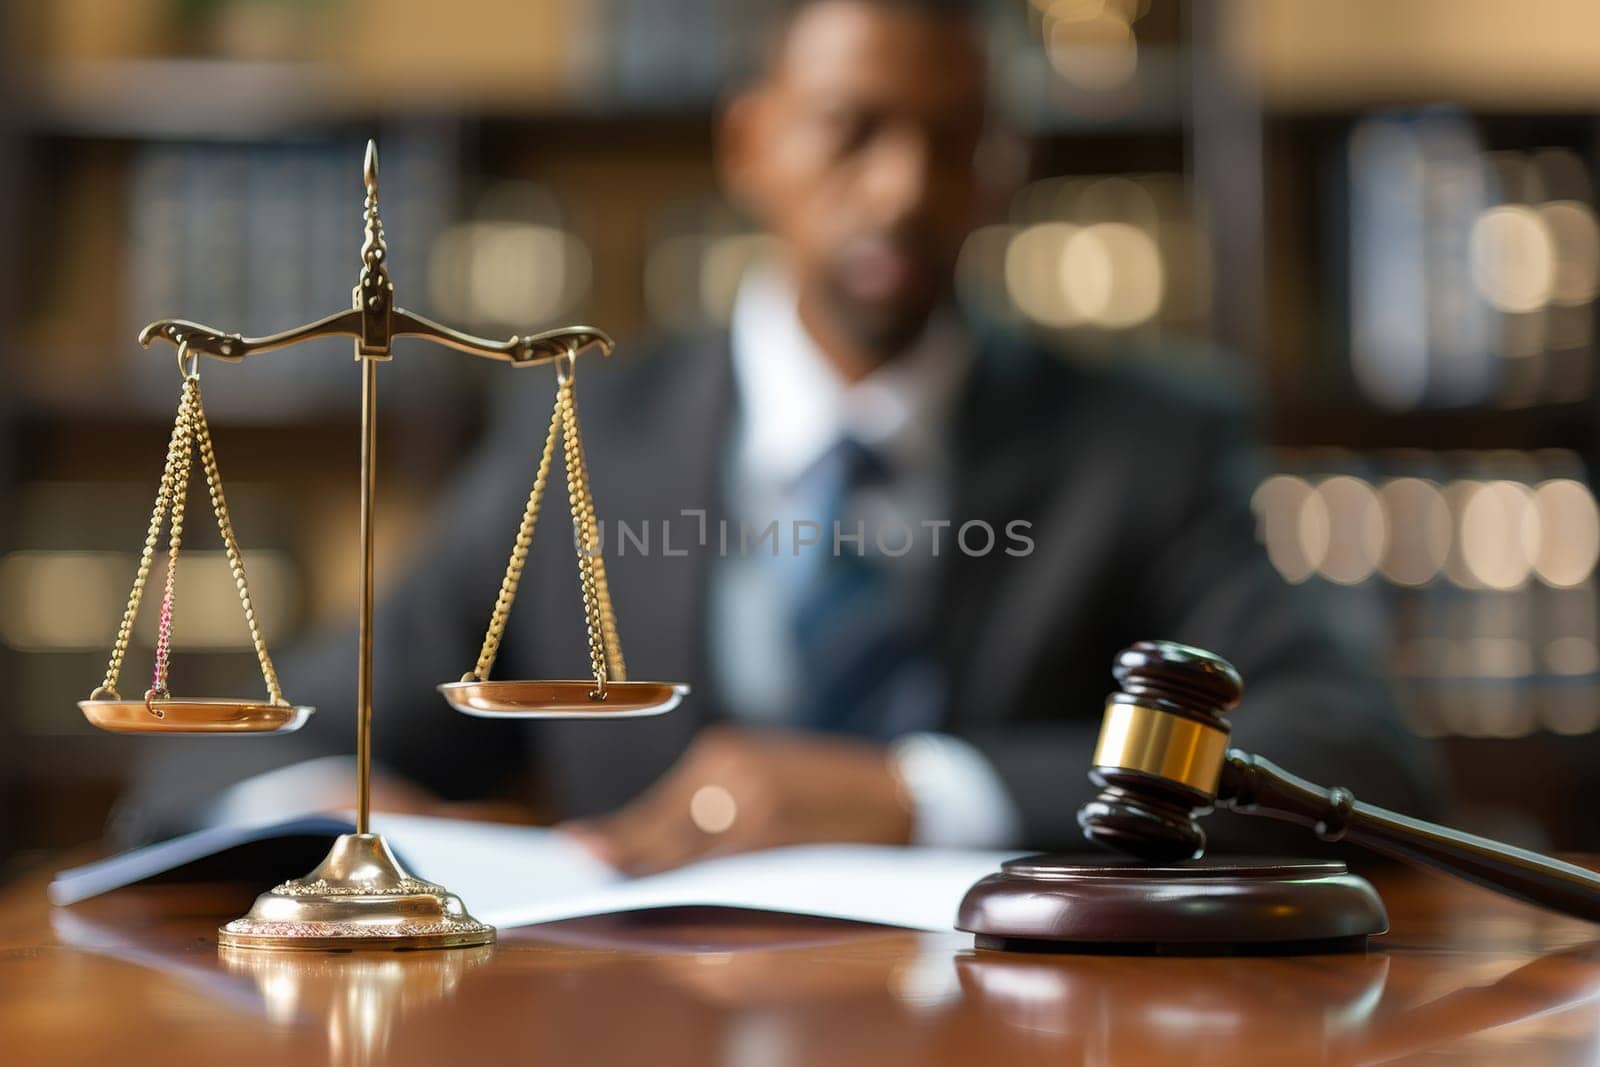 A man sits at a desk with a scale and gavel in front of him. The scene suggests a moment of decision or judgment